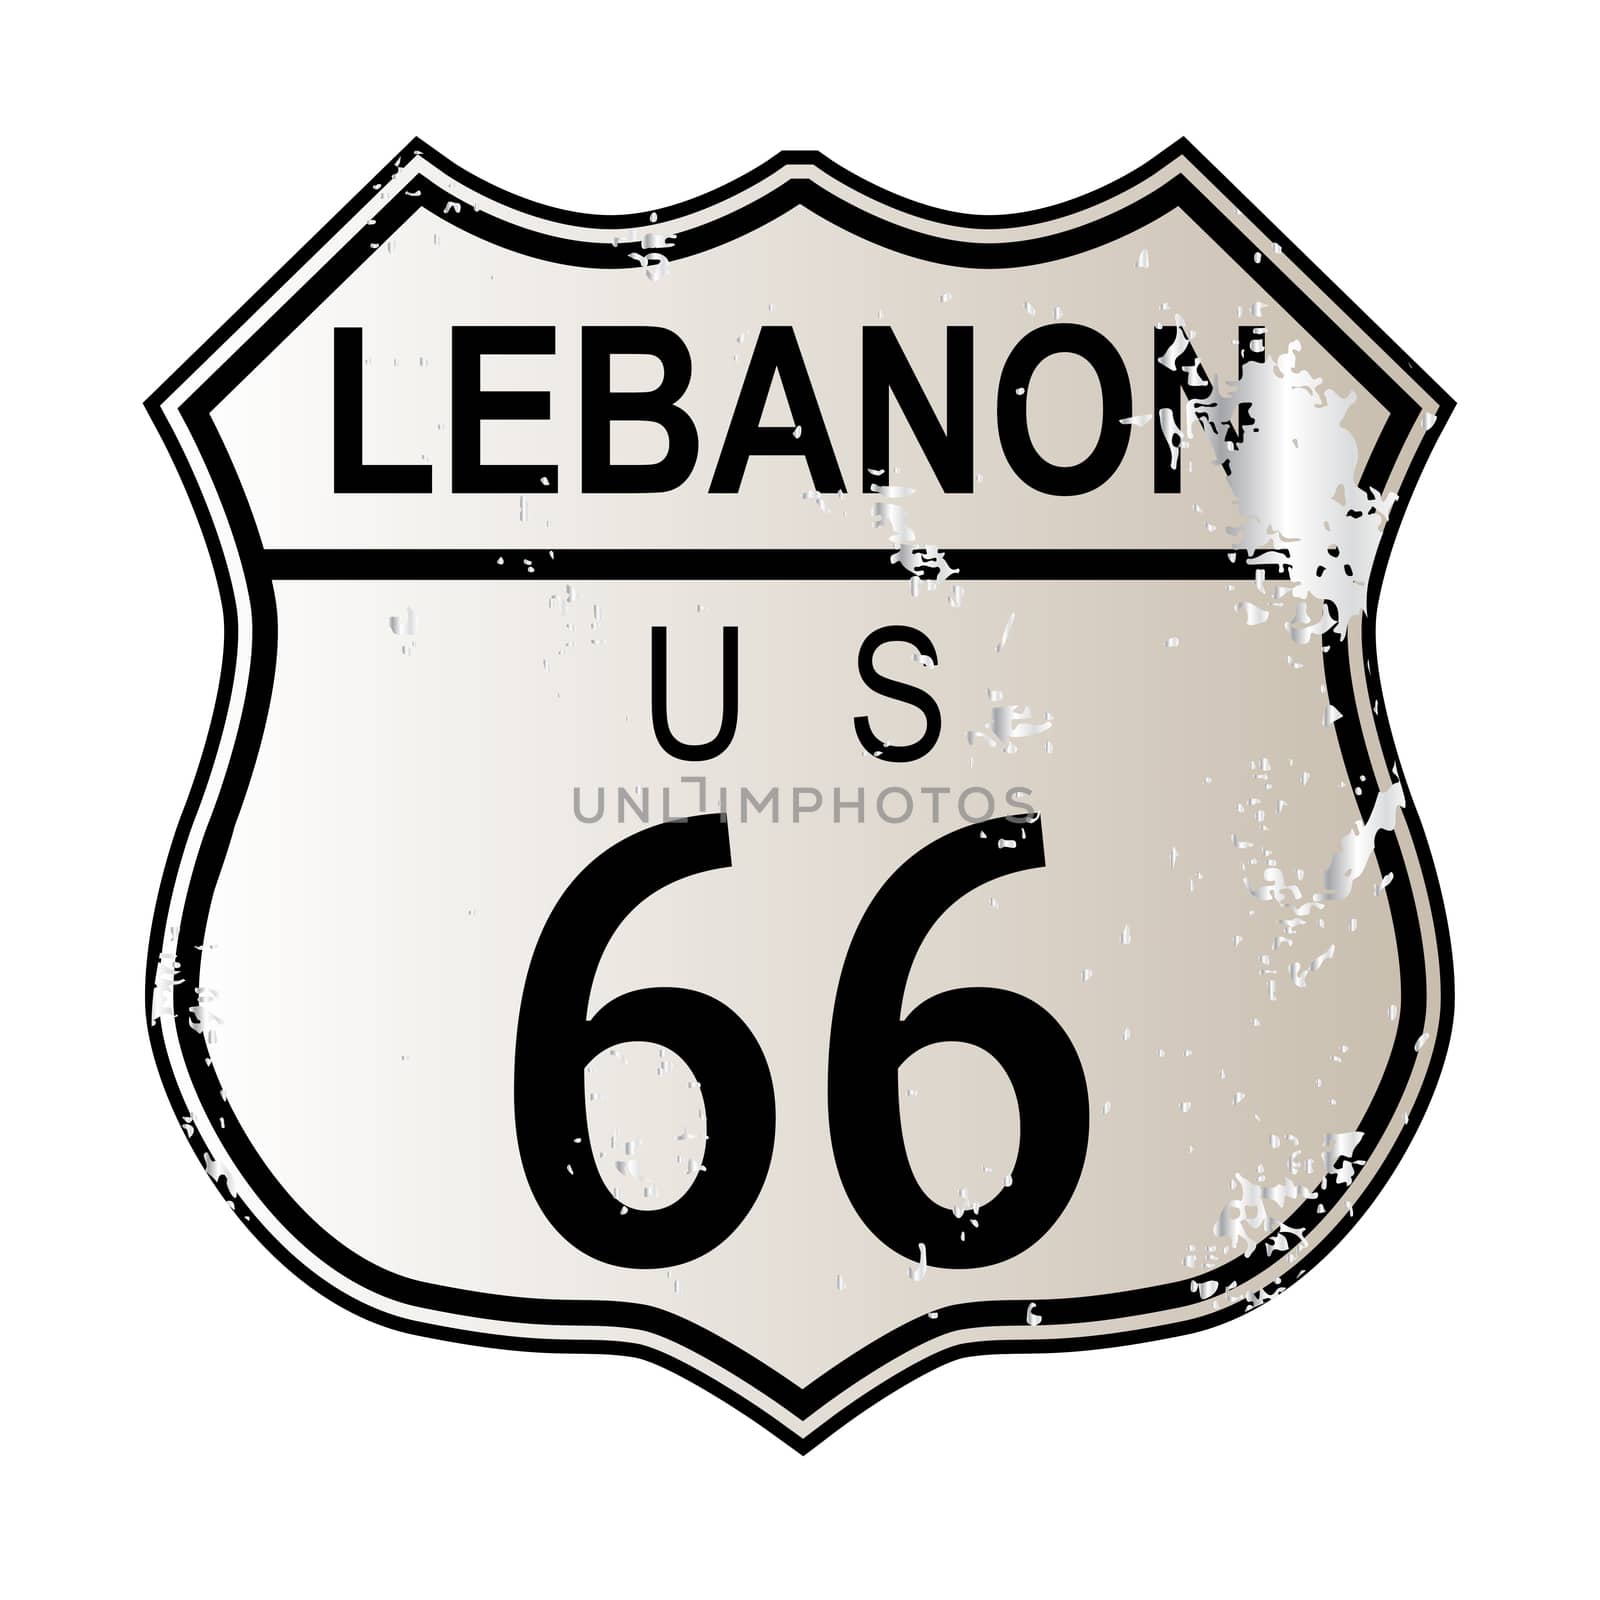 Lebanon Route 66 traffic sign over a white background and the legend ROUTE US 66